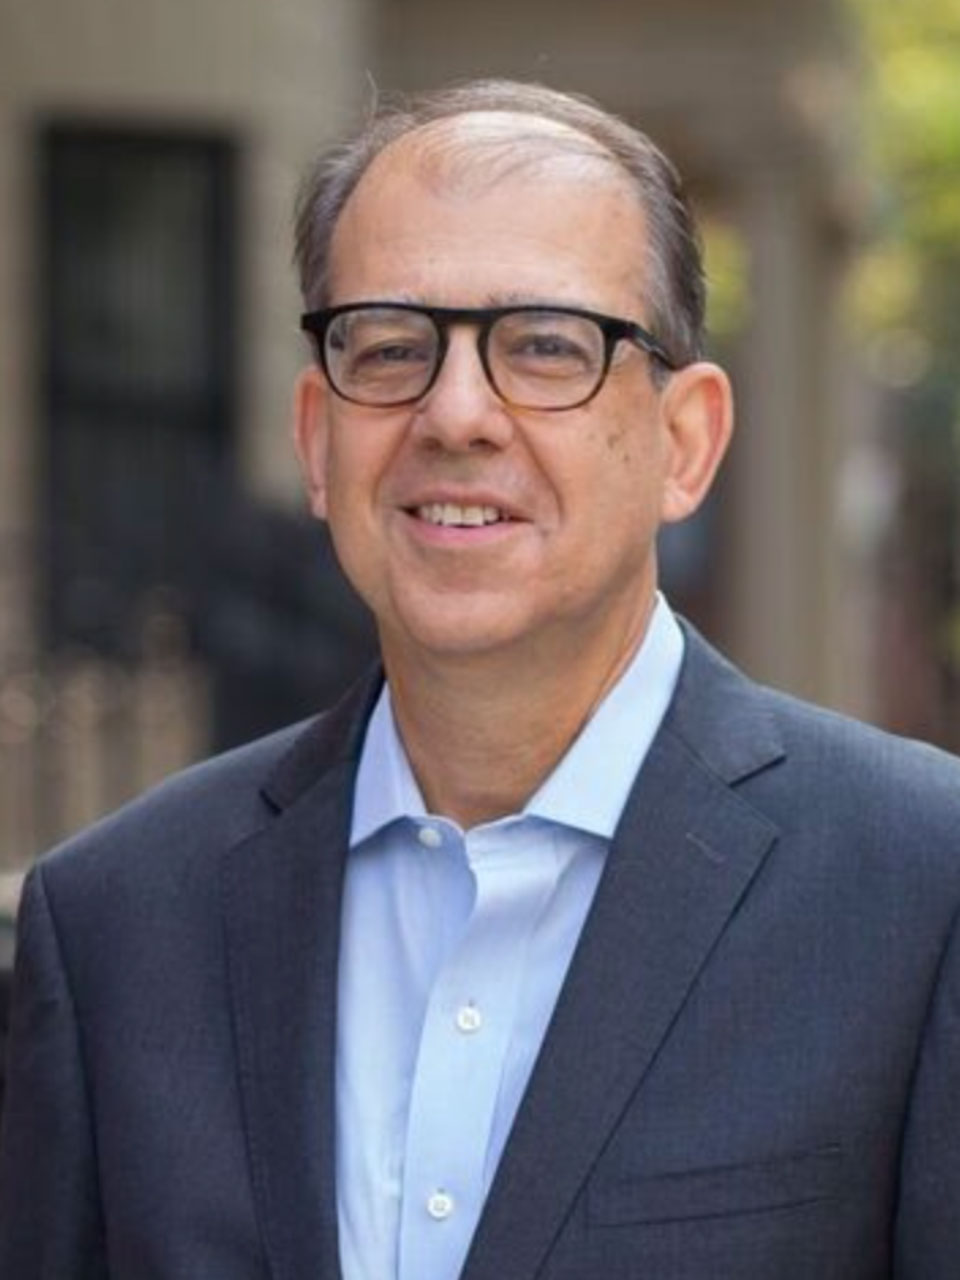 A person with thinning gray hair, glasses, and a gray formal jacket smiles at the viewer.